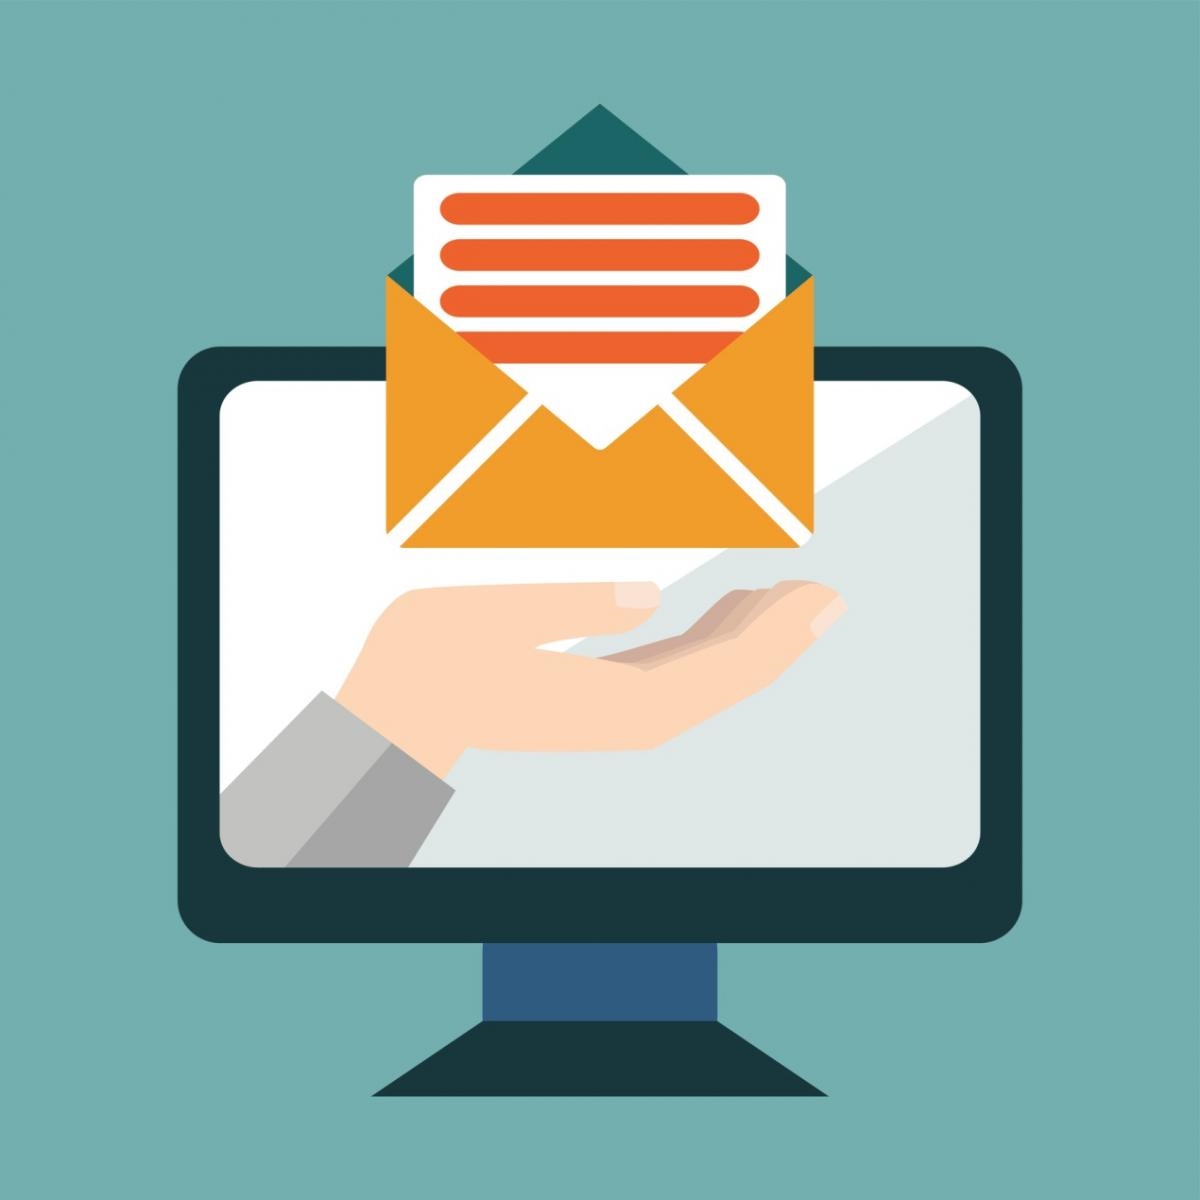 6 Tips to Skyrocket Your Email Marketing Click-Through Rates